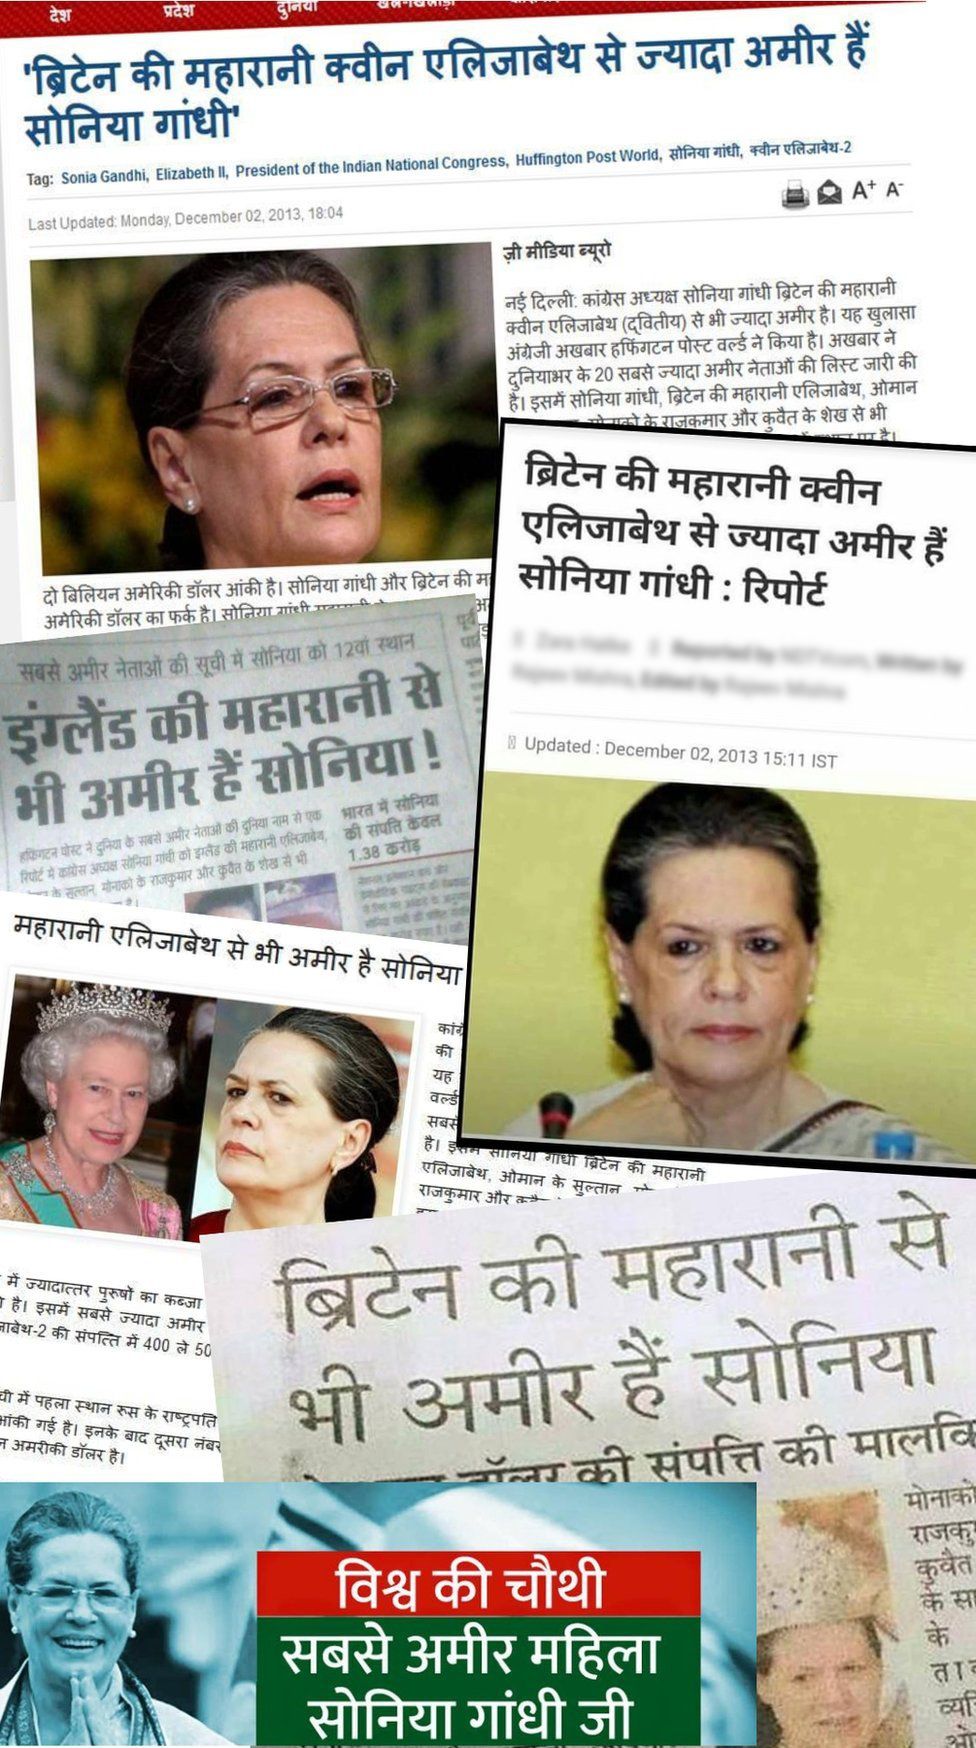 Local reports picking up on claim that Sonia Gandhi is richer than the Queen